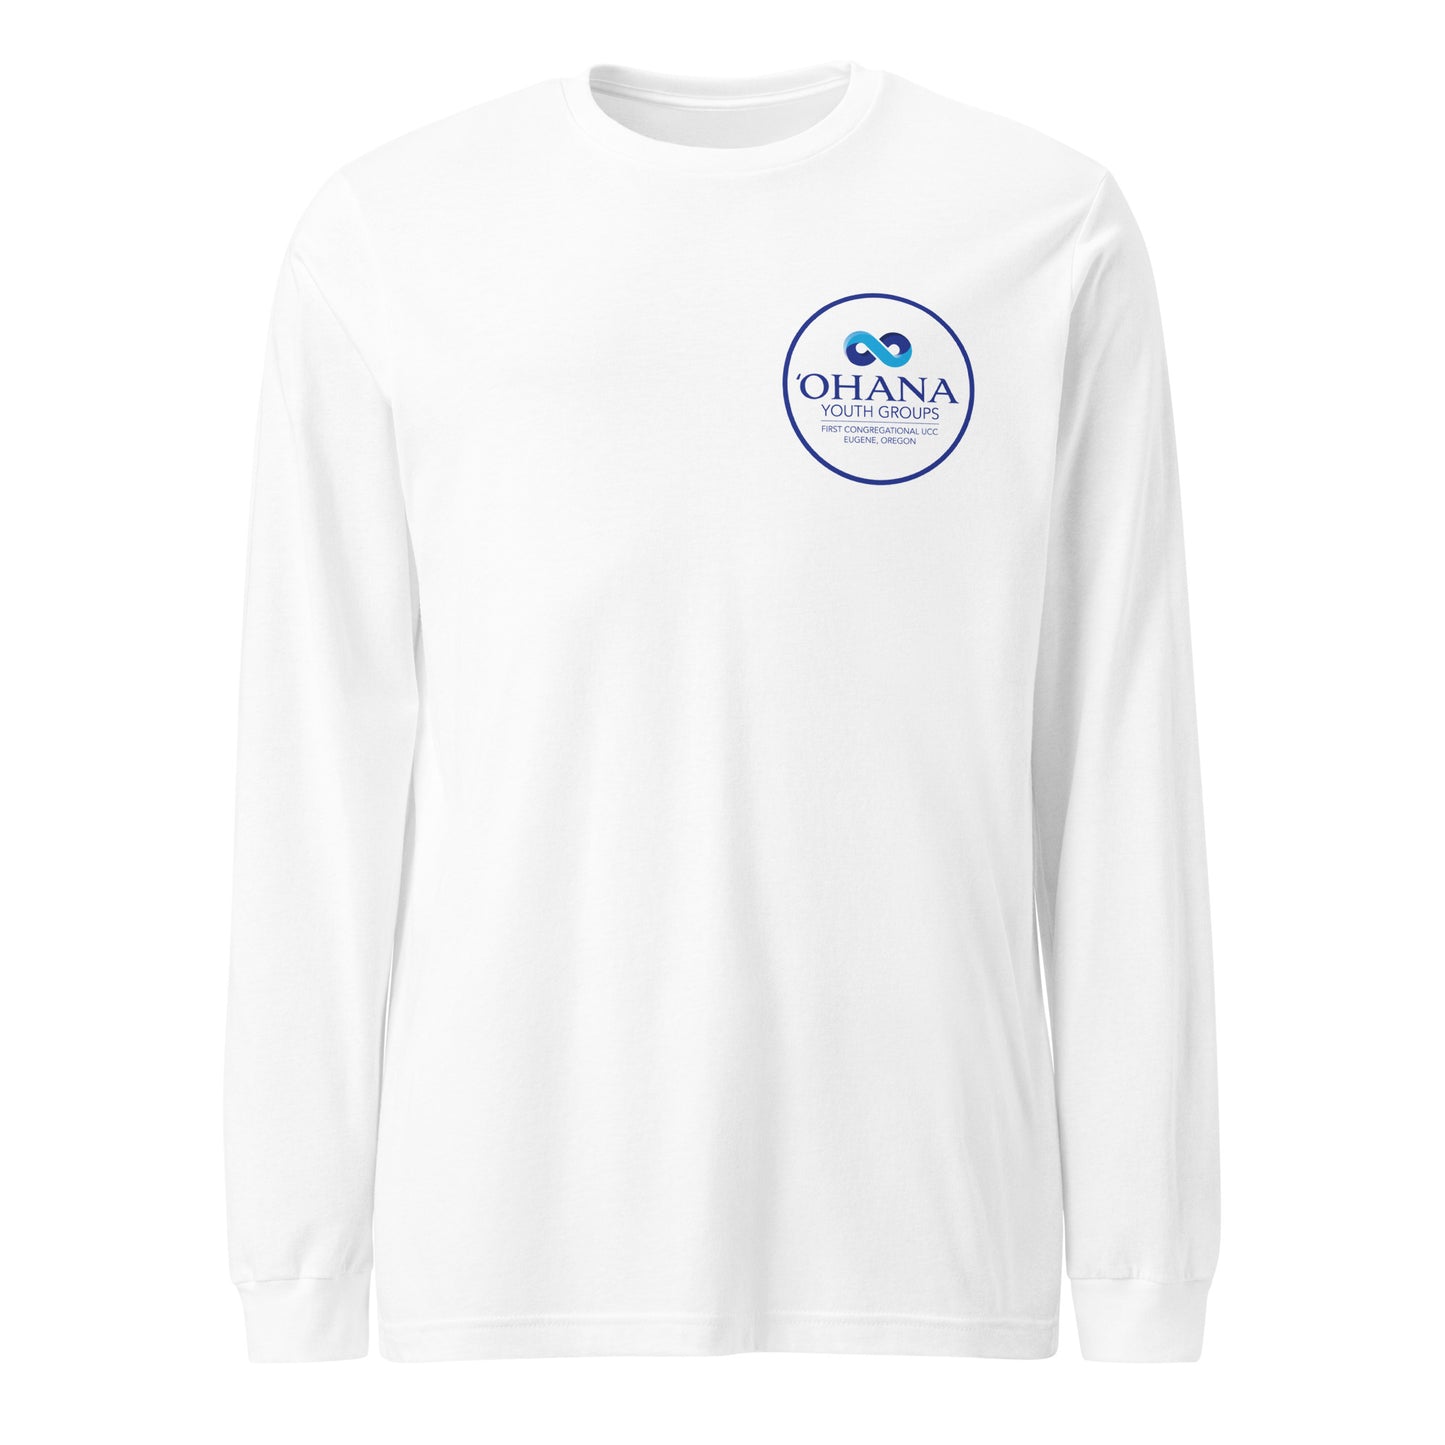 A Just World For All Unisex Long Sleeve Tee